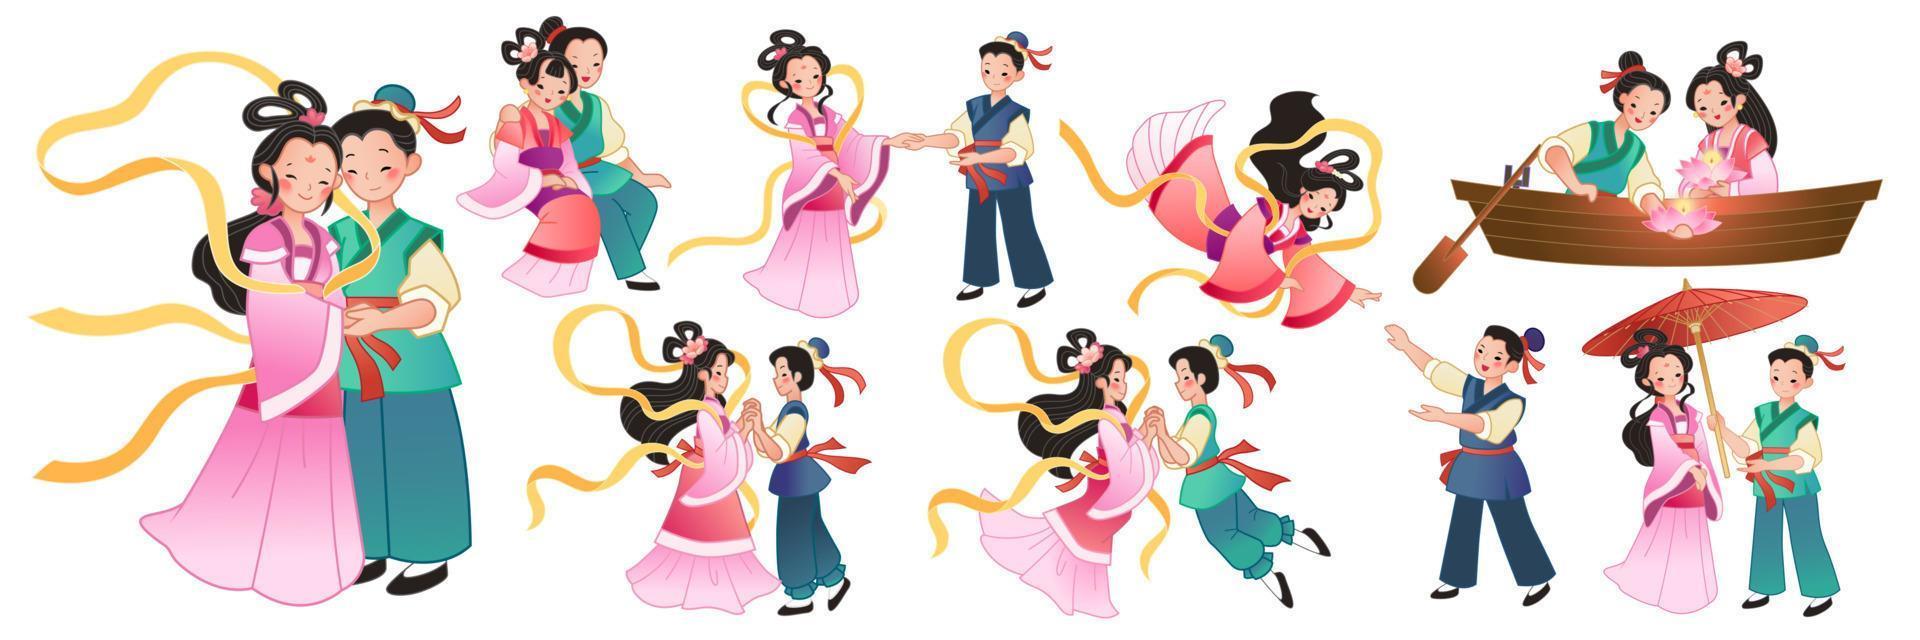 Cowherd and weaver girl for Qixi Festival. The ancient tale couple characters on Chinese Valentine's day with different poses and activities vector